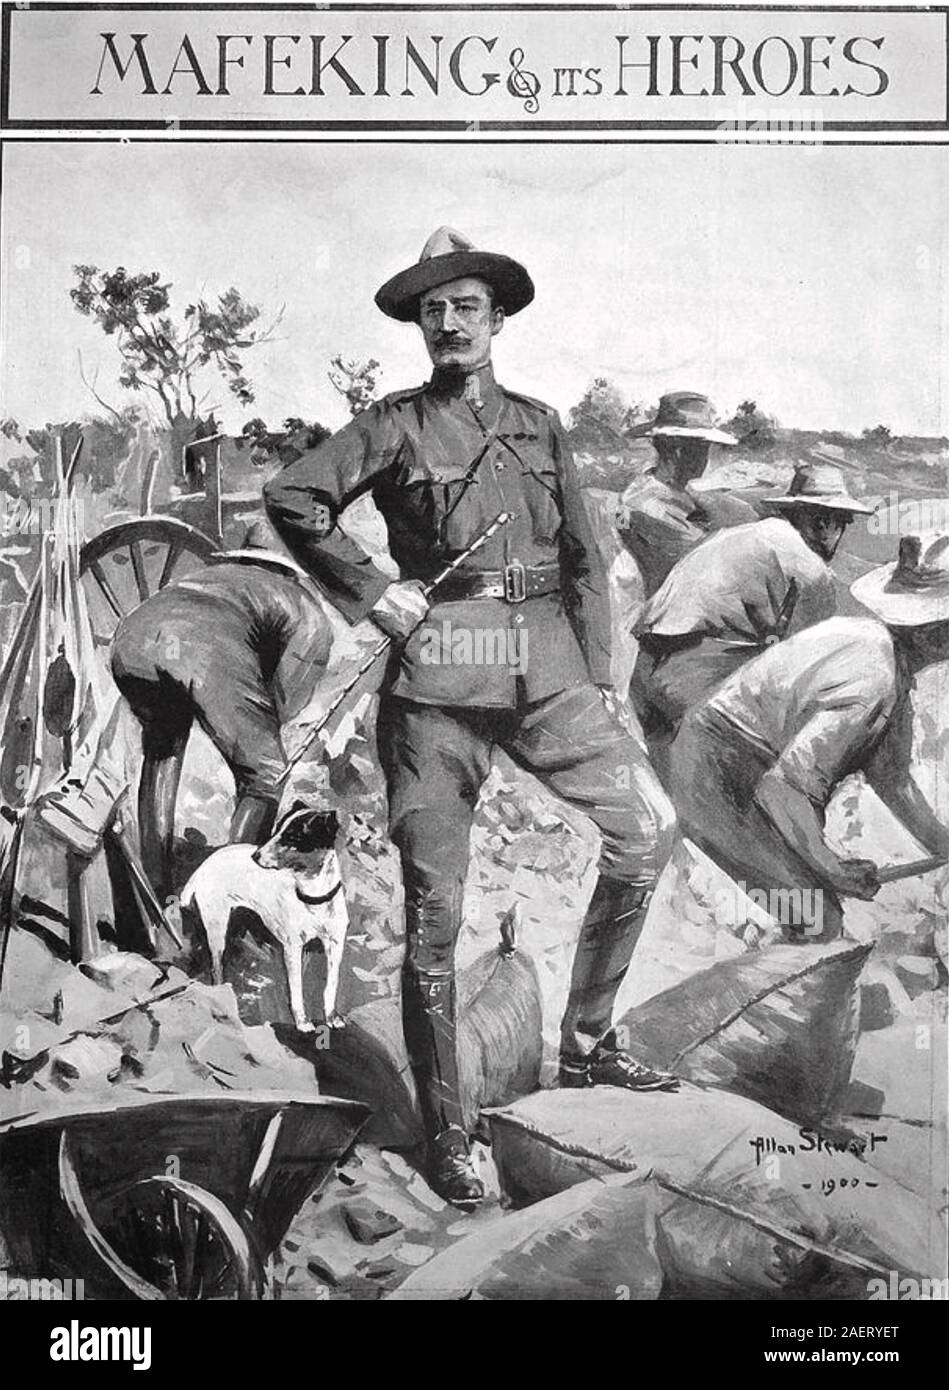 SEIGE OF MAFEKING 1899-1900  Book published in 1900 showing Robert Baden-Powell on the cover Stock Photo